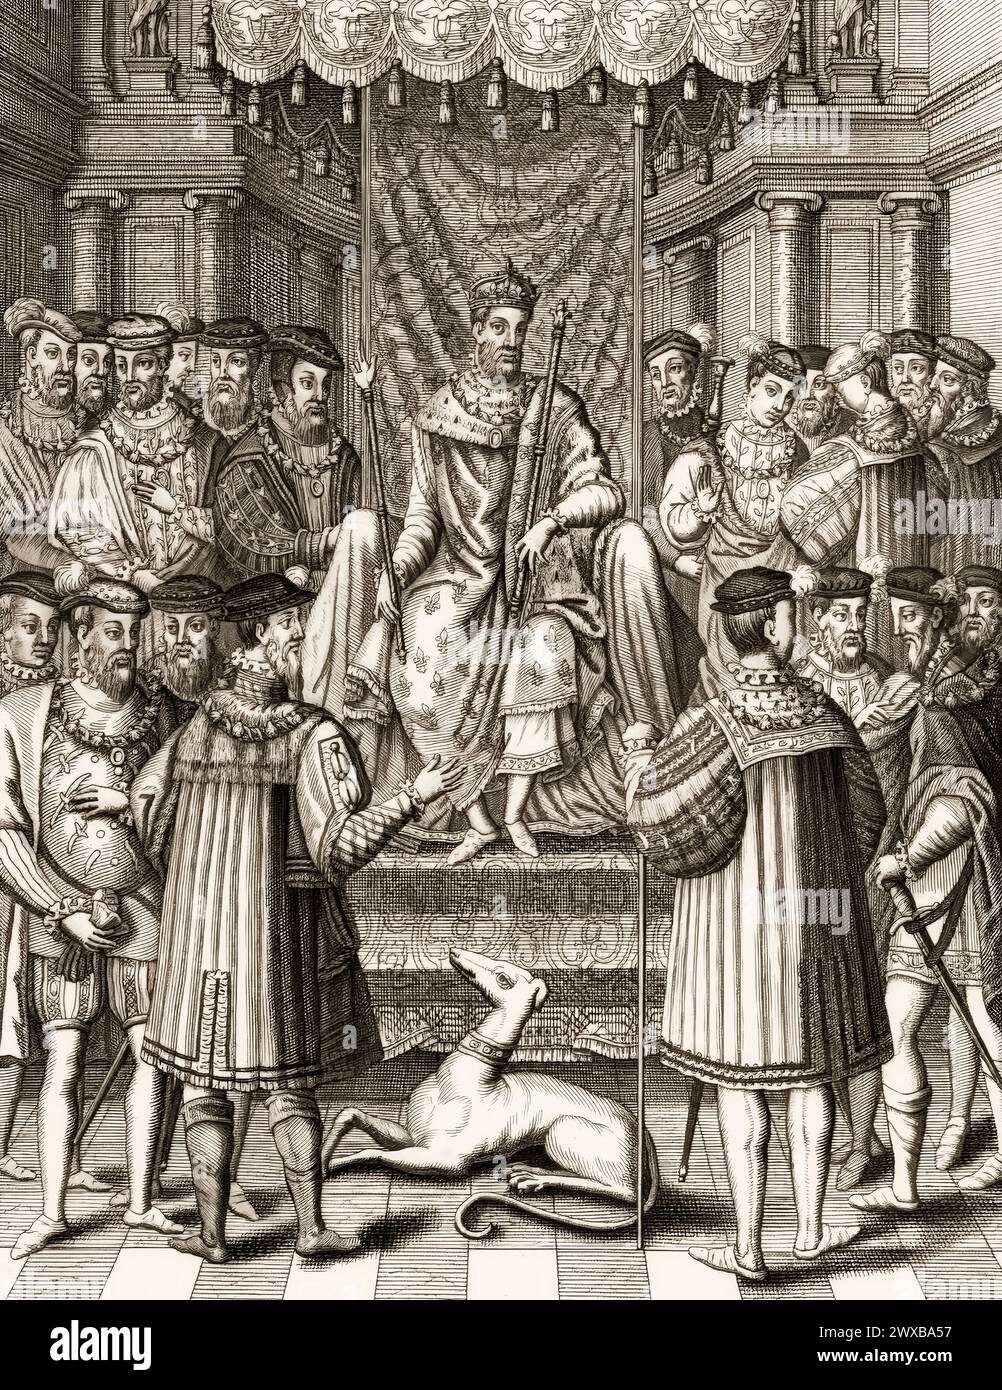 The court of Francis I, King of France, c. 1540 Stock Photo